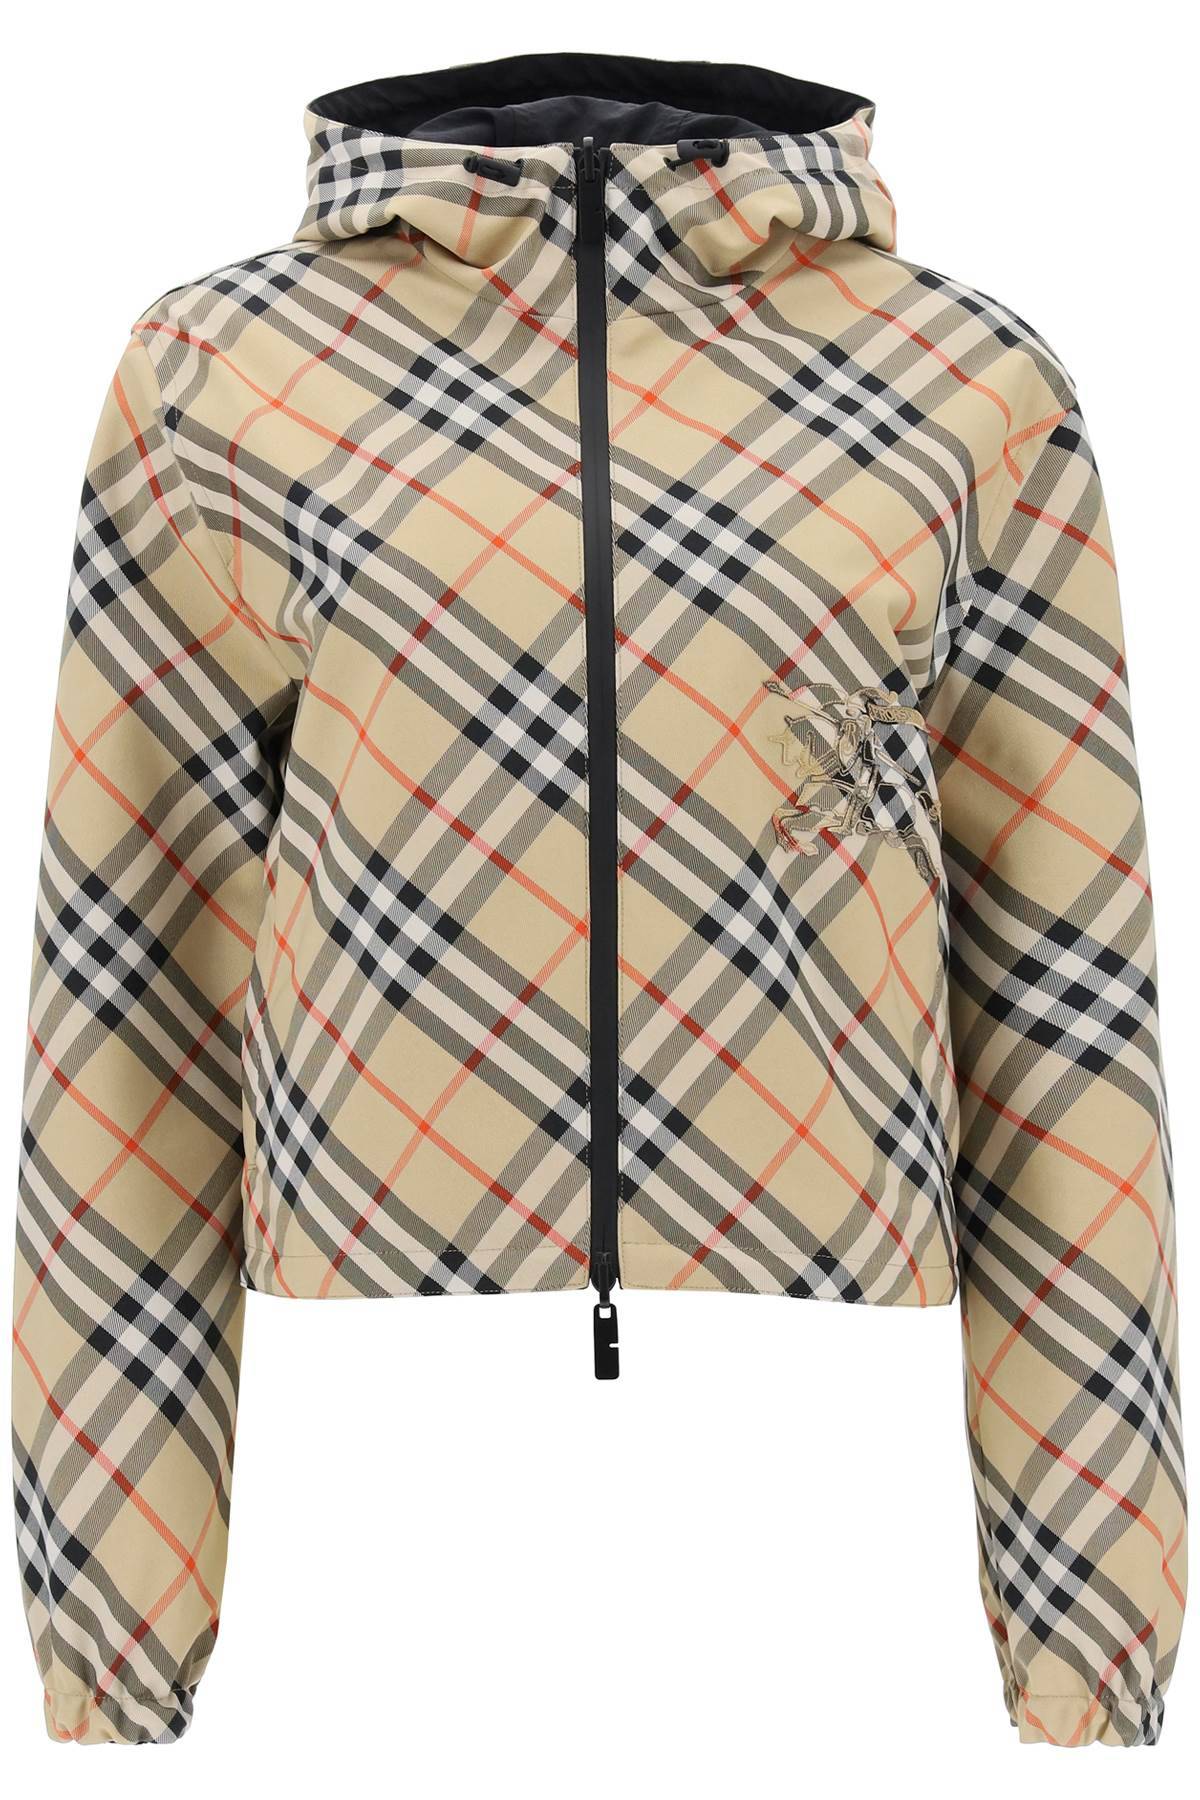 Burberry BURBERRY reversible hooded jacket